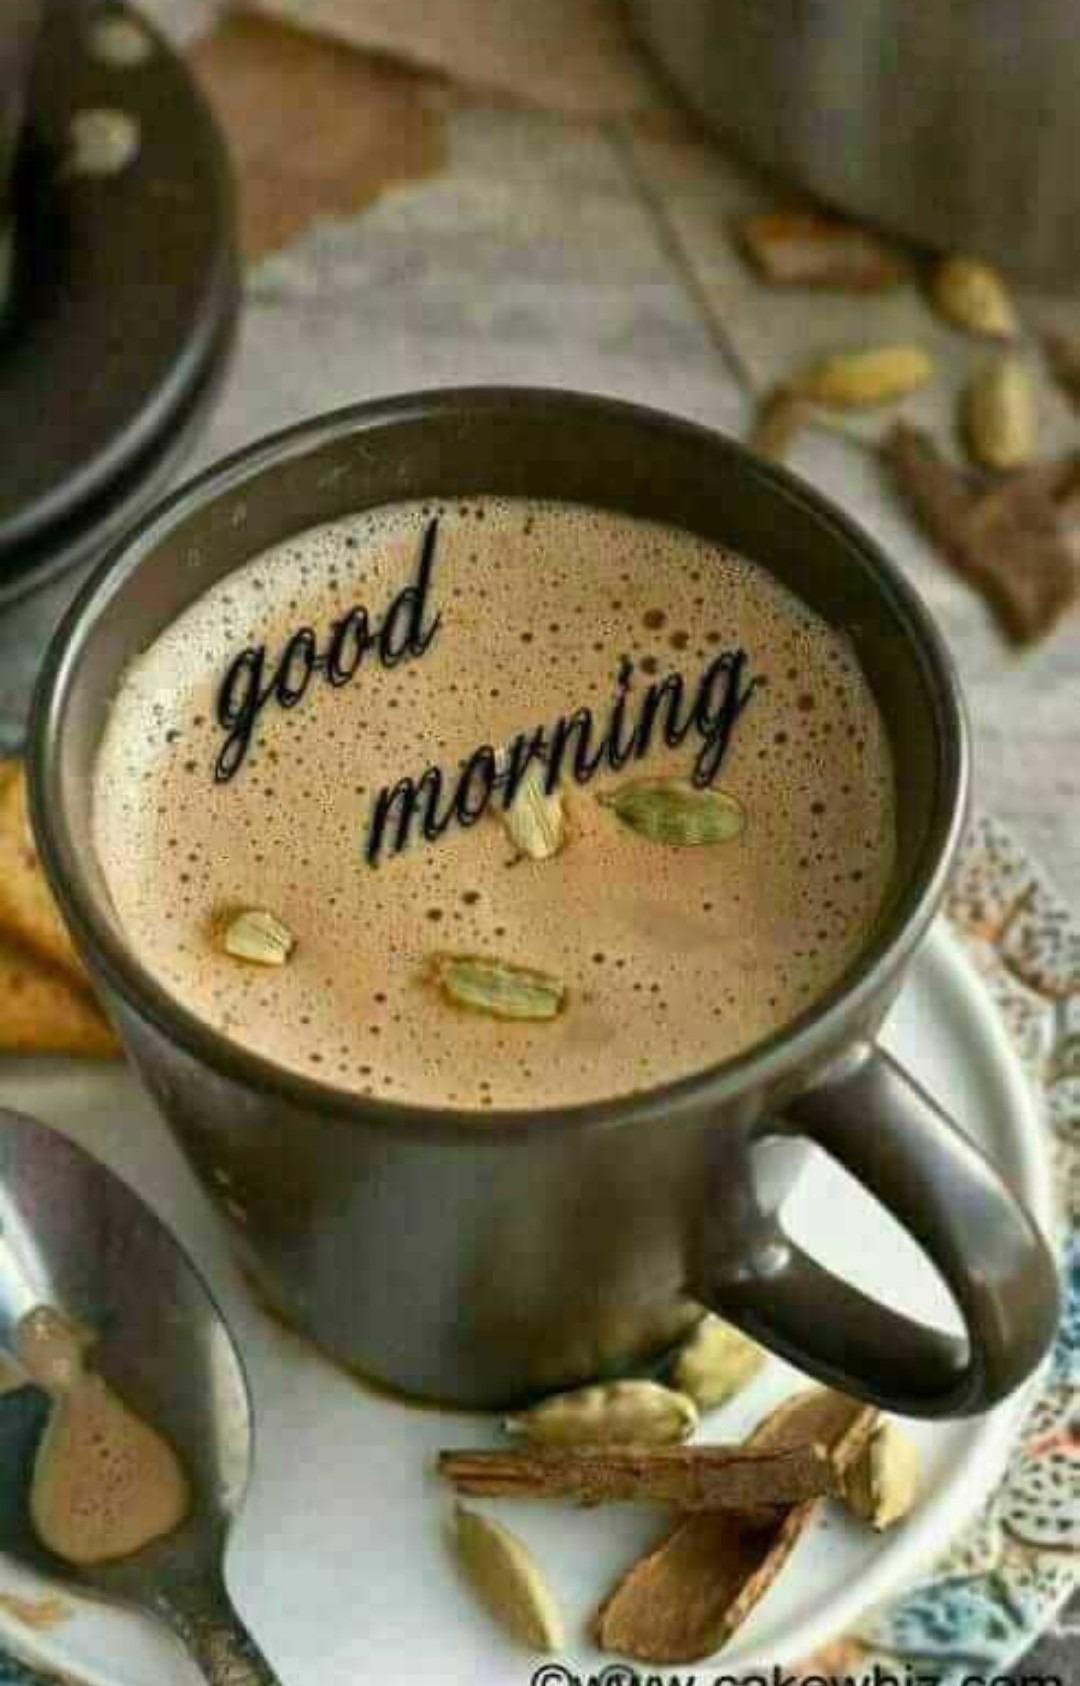 201+ Sweet Good Morning Images with Tea Cup - Good Morning